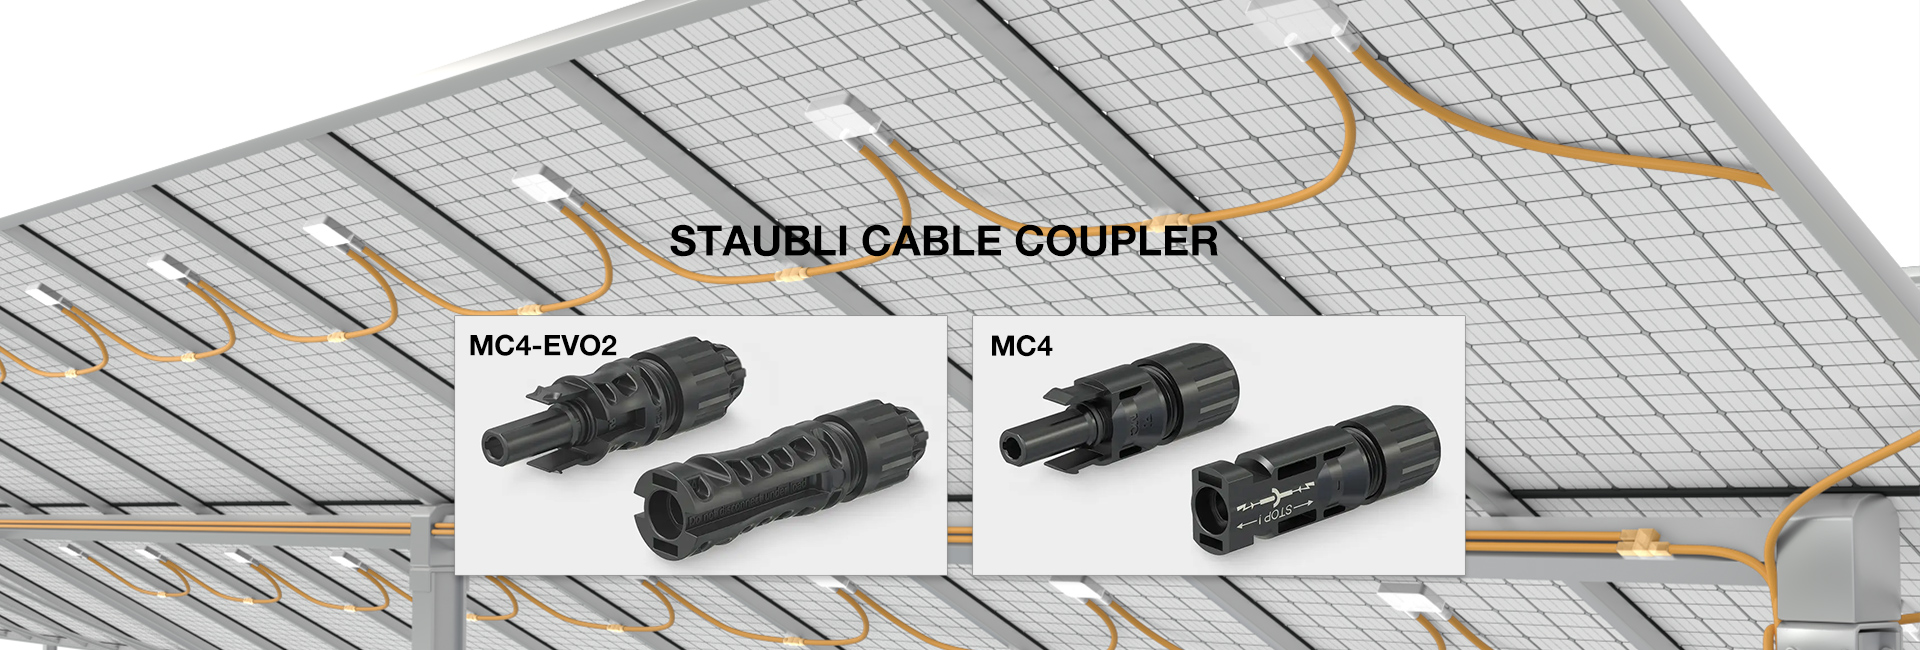 Staubli cable coupler PV connector